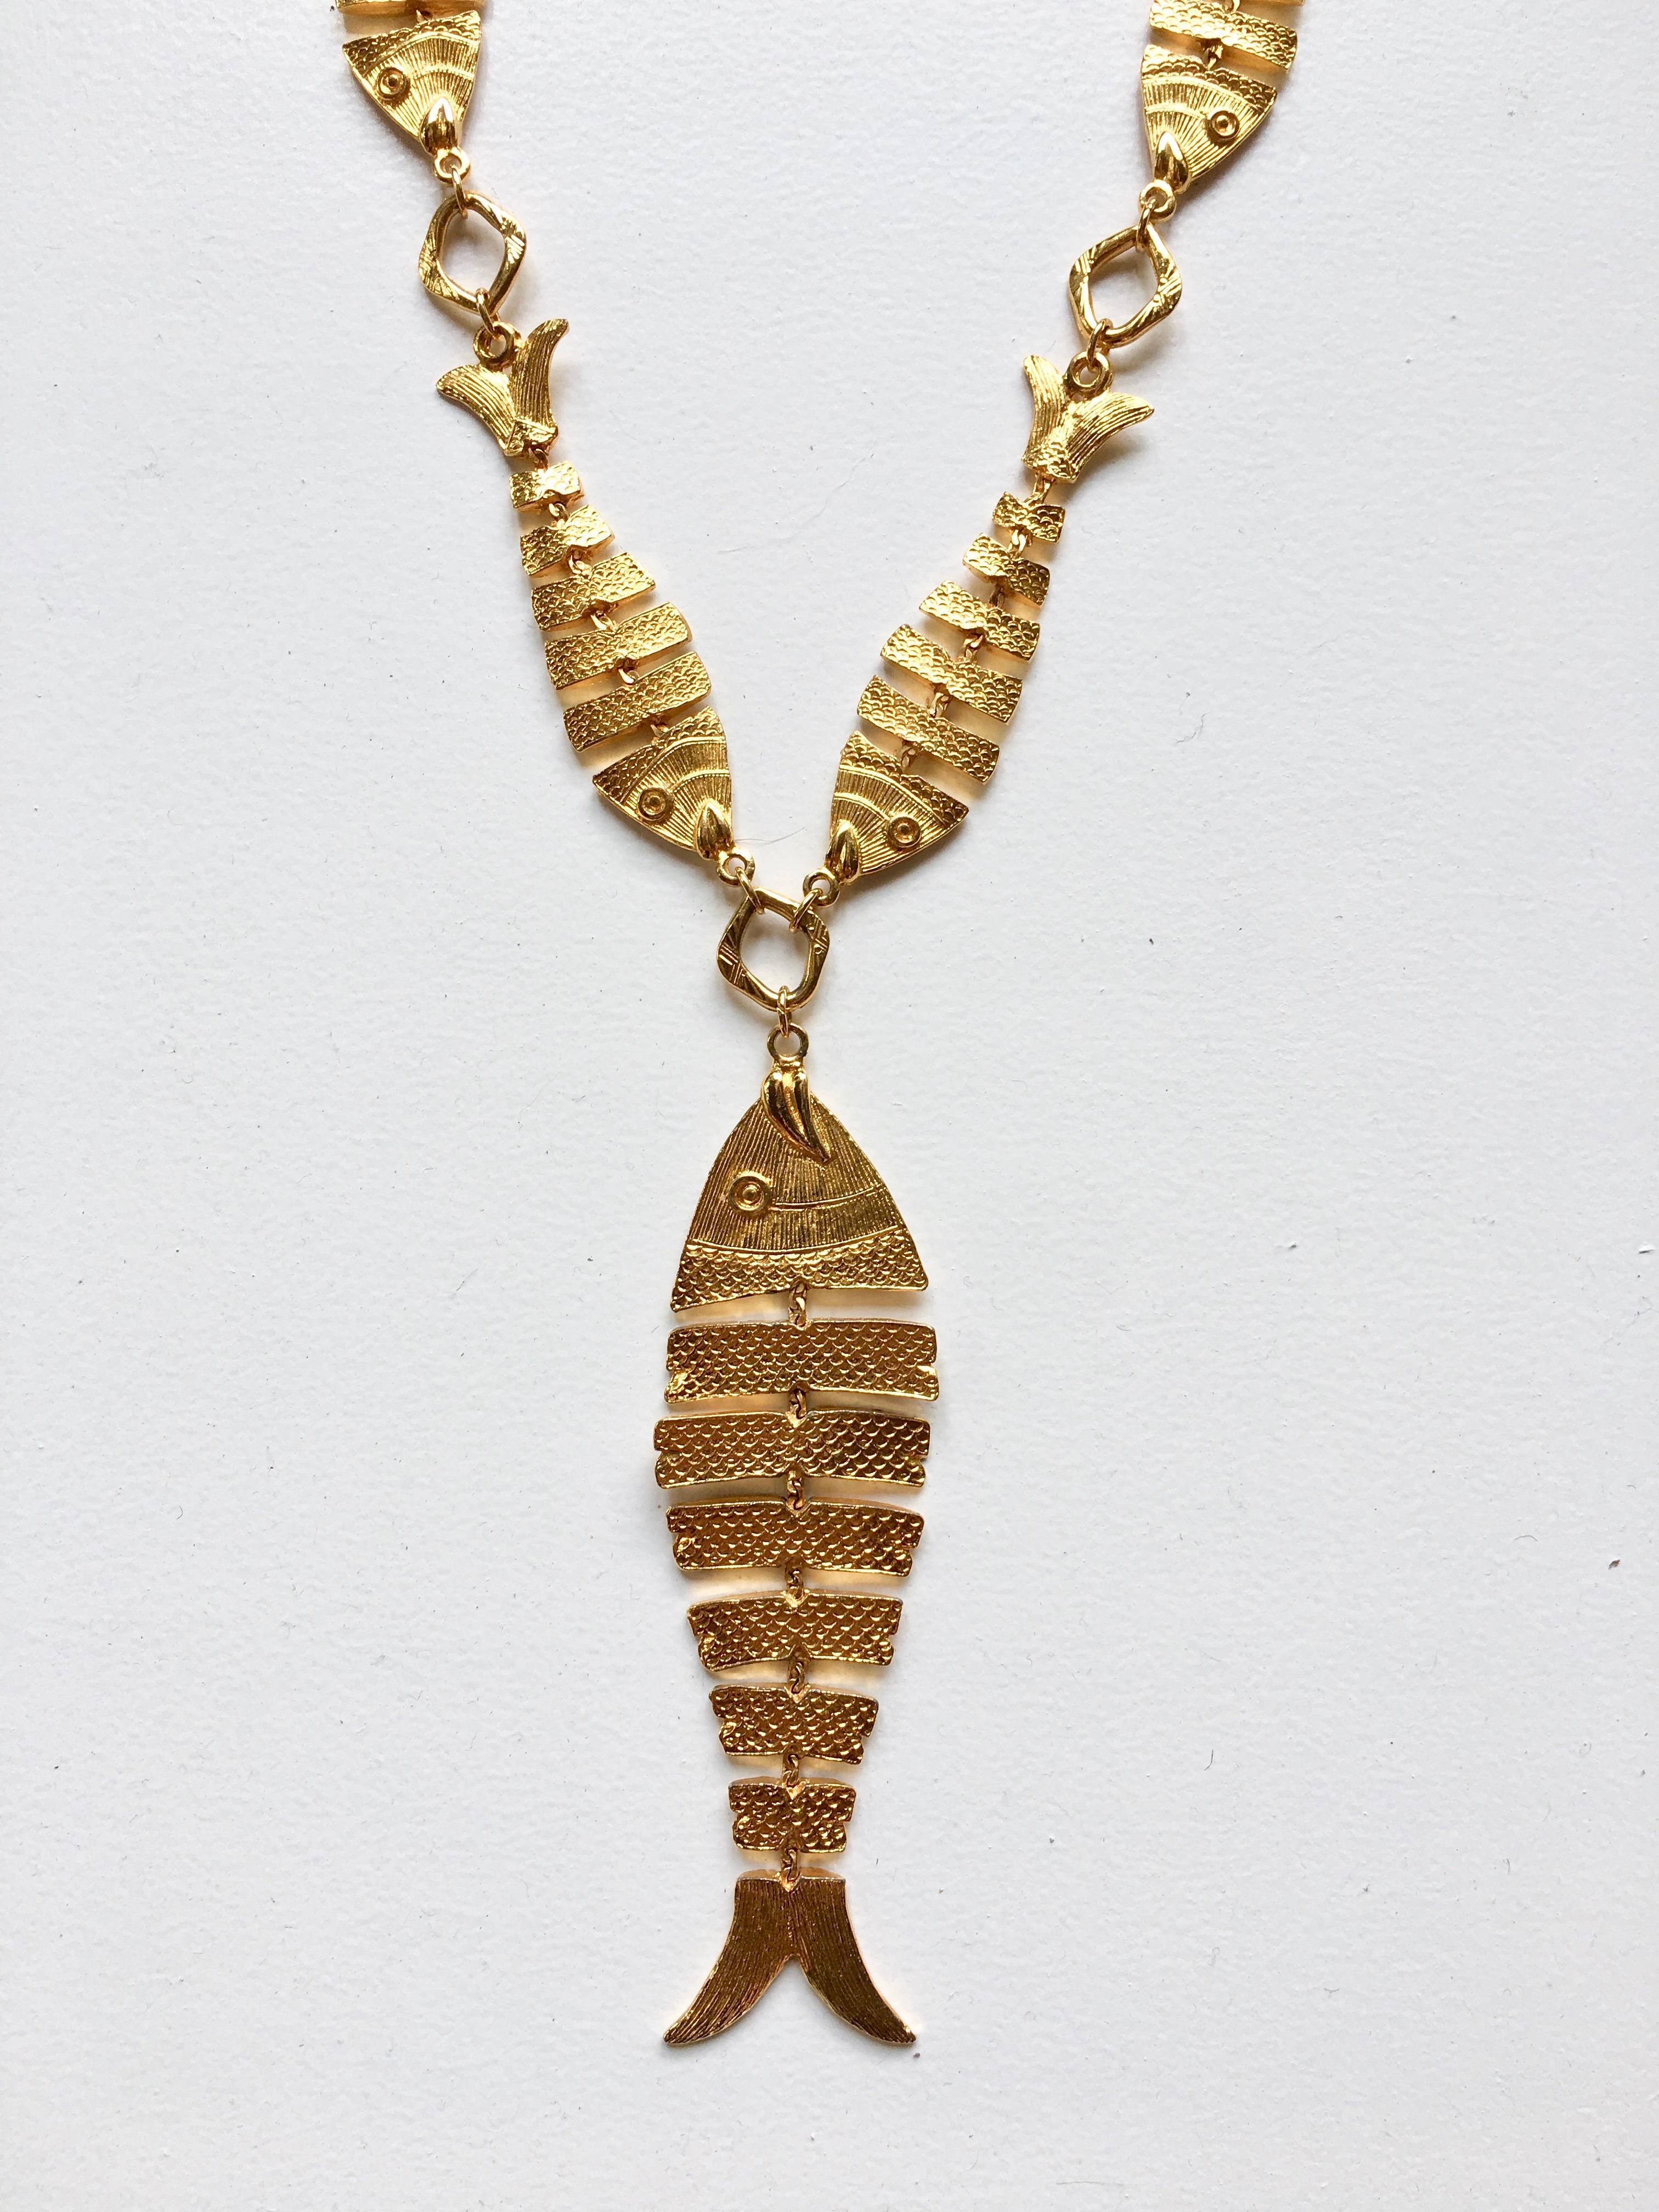 This is a super fun piece made by Cadoro in the 1970s. It features a necklace made up of articulated gold-tone fish with a larger articulated gold-tone fish pendant hanging from it. The necklace without the pendant measures 28 1/2 inches long. The